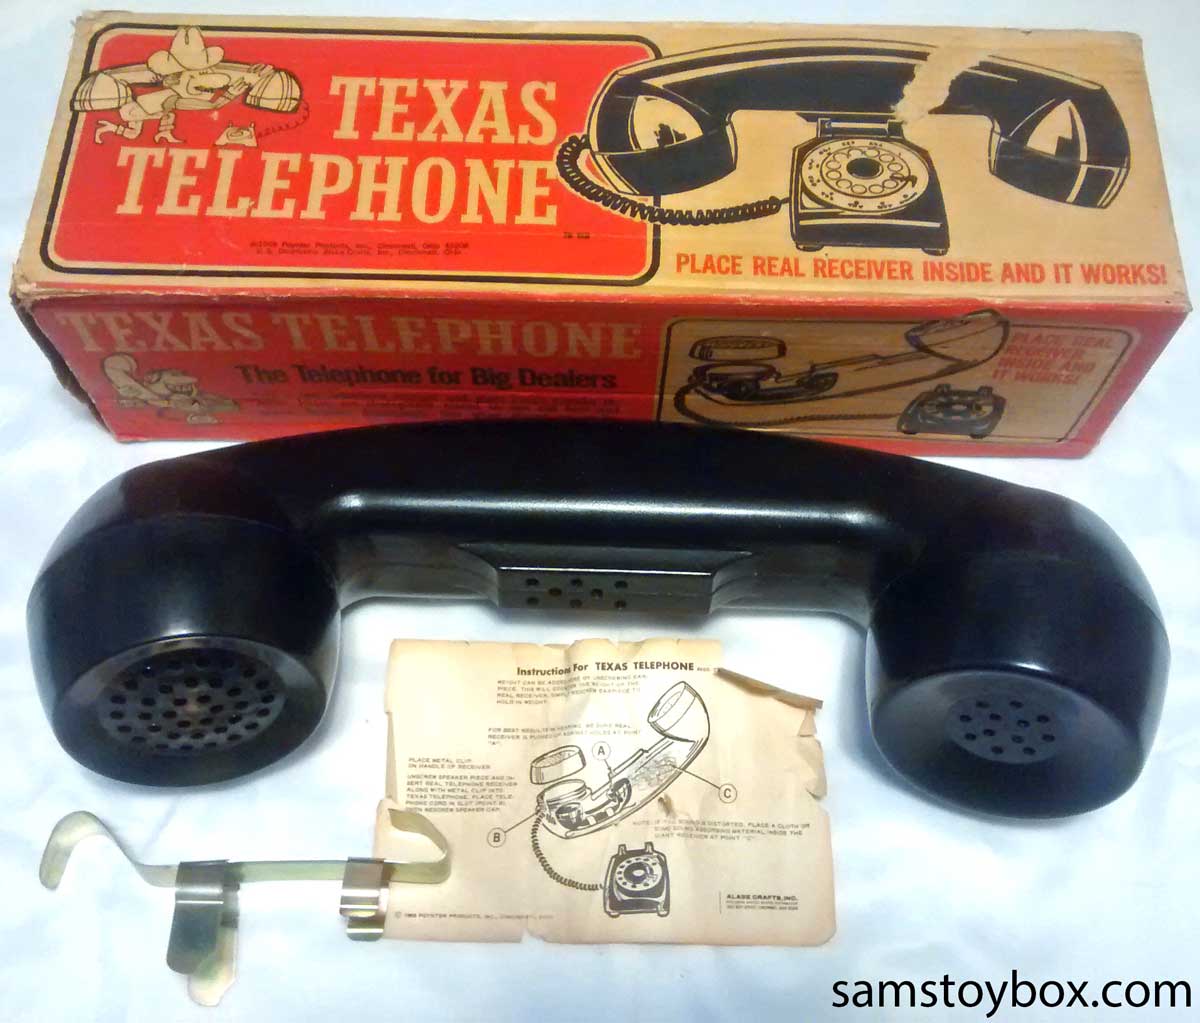 Texas Telephone by Poynter Products